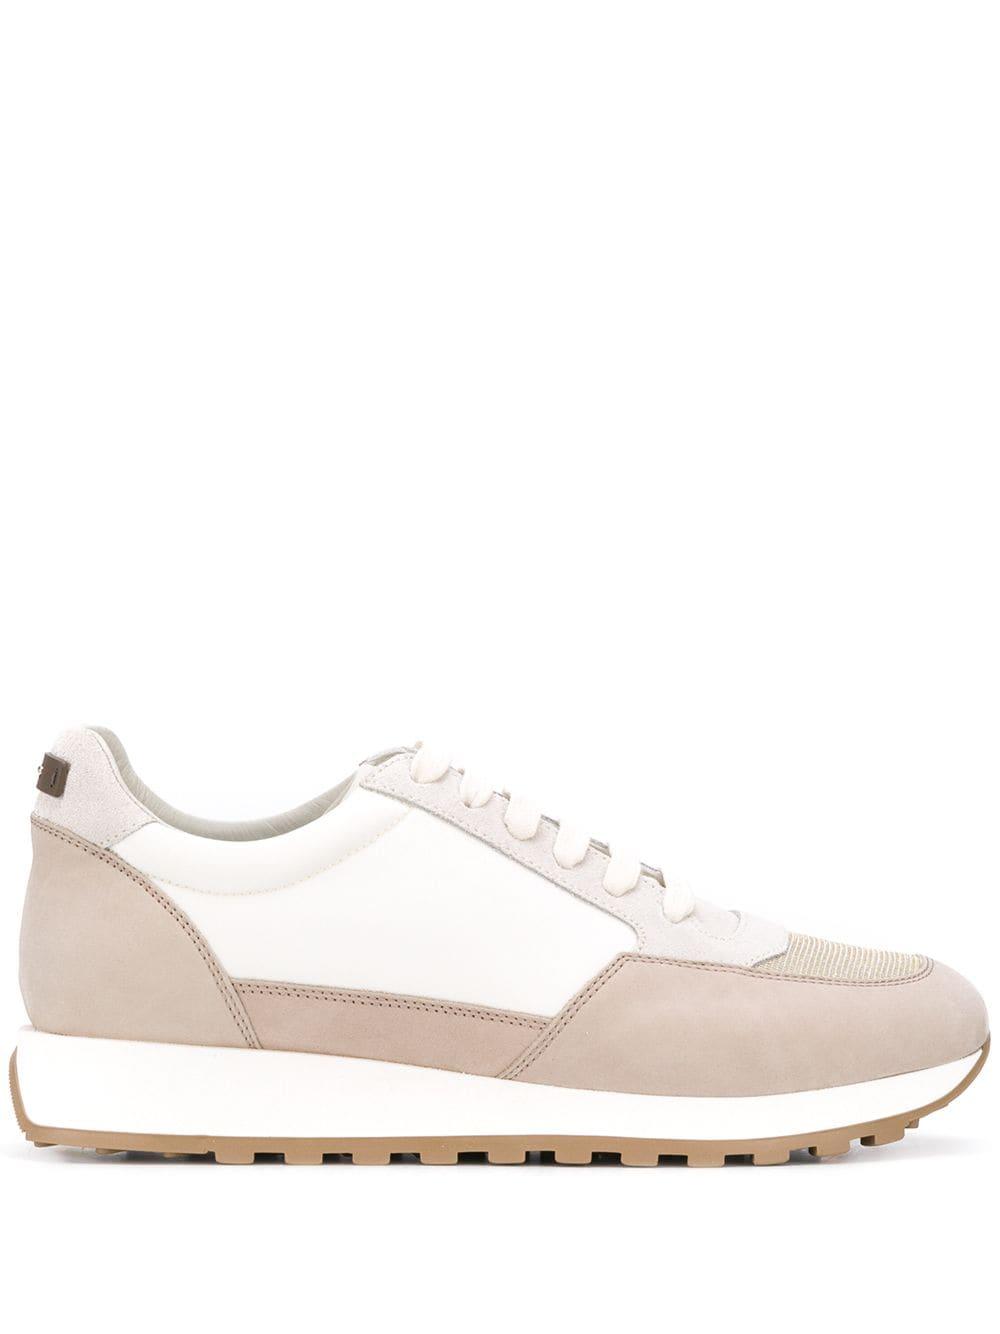 Peserico Leather Panelled Low-top Sneakers in White - Lyst